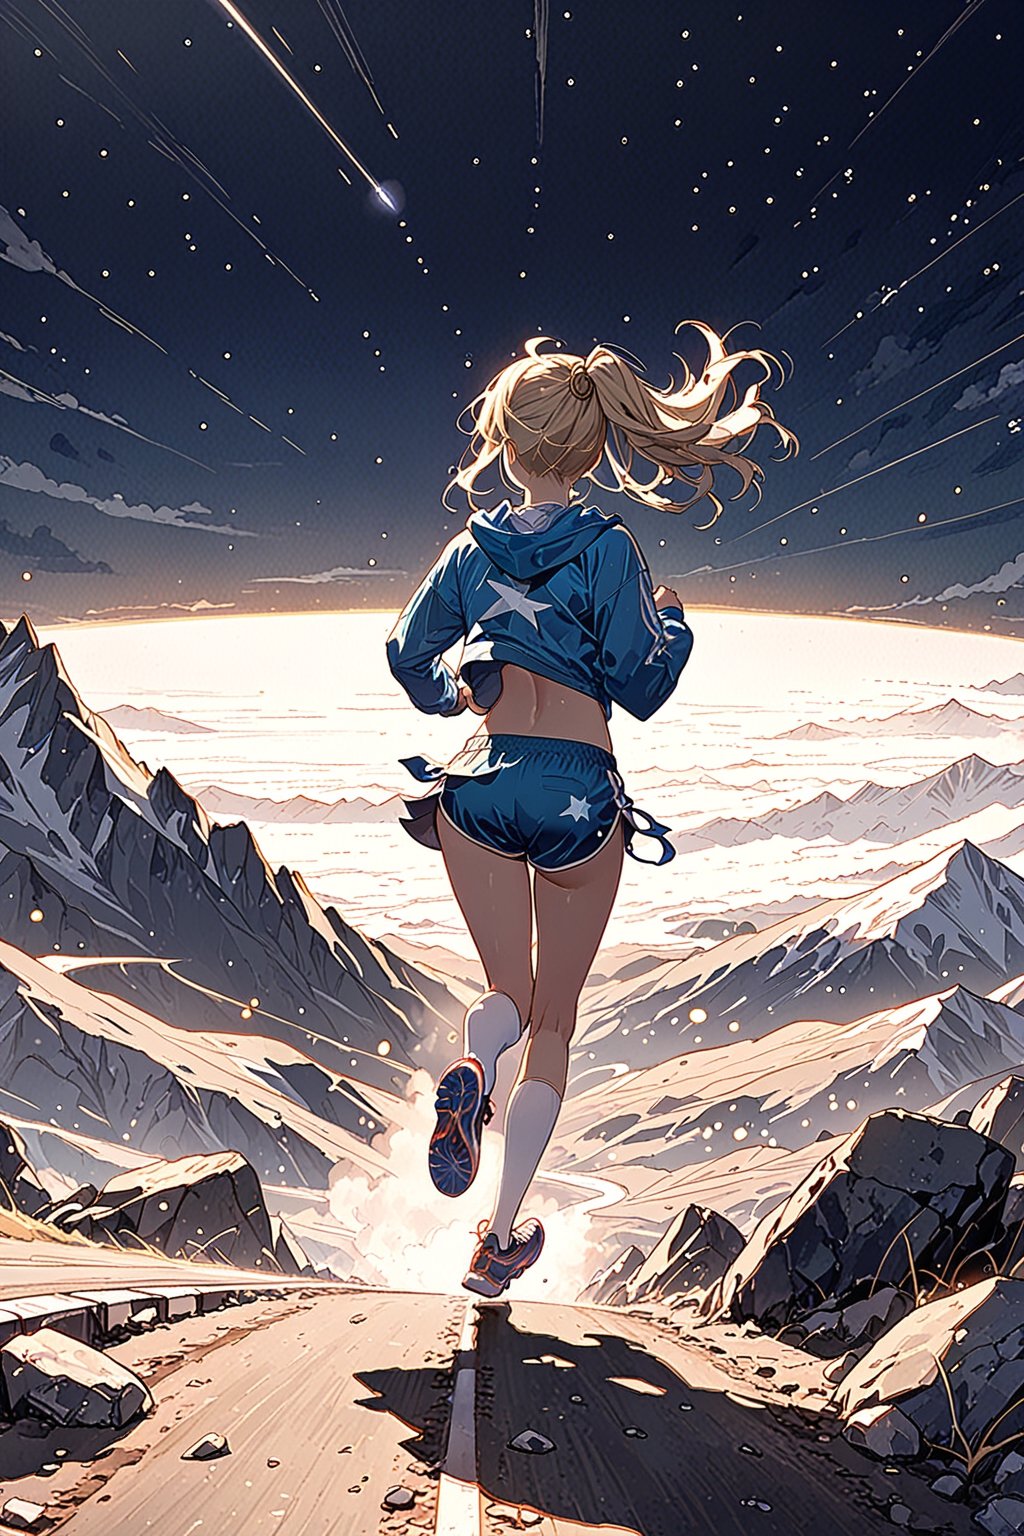 
(masterpiece:1.2), best quality, ultra-detailed, 8K, A girl, ((running)), night,toned perfect body proportions, blonde hair, blonde ponytail hair, wearing a blue sports top, navel, blue floaty shorts, white knee-high socks,  running shoes ,black|white, trail running uphill on a foggy matte black mountain road, The road is made of dirt and stones, with the camera view from behind looking forward, deep in focus, mountain, rock, shooting star, Wasteland style background, real_hands, better_hands, hands,